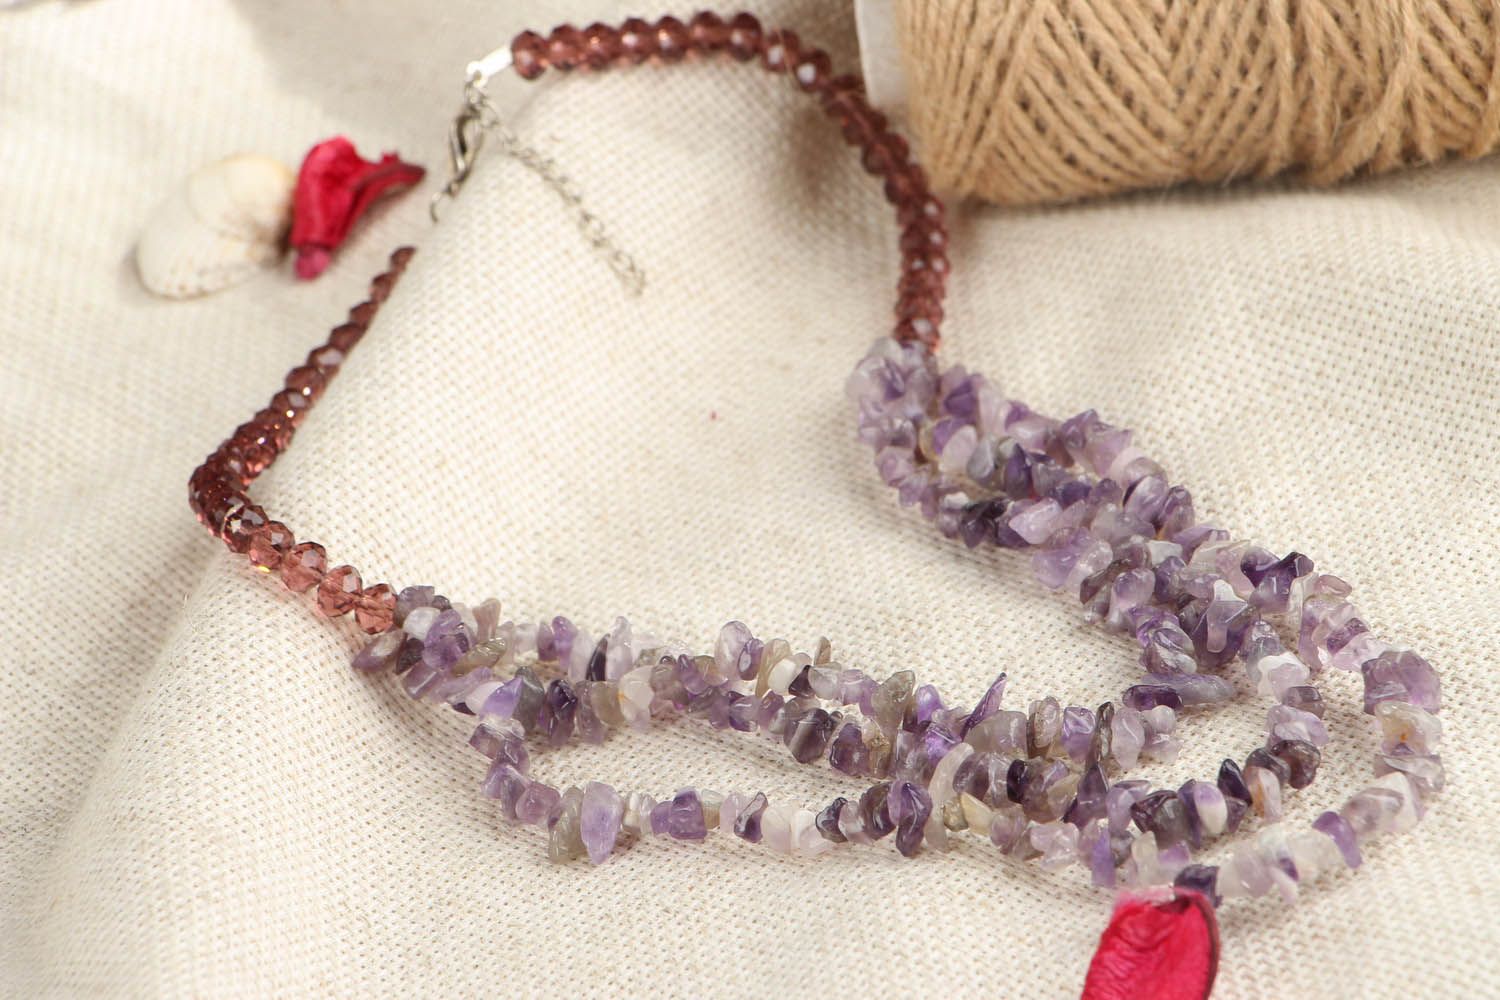 Bead necklace made of amethyst and glass photo 4